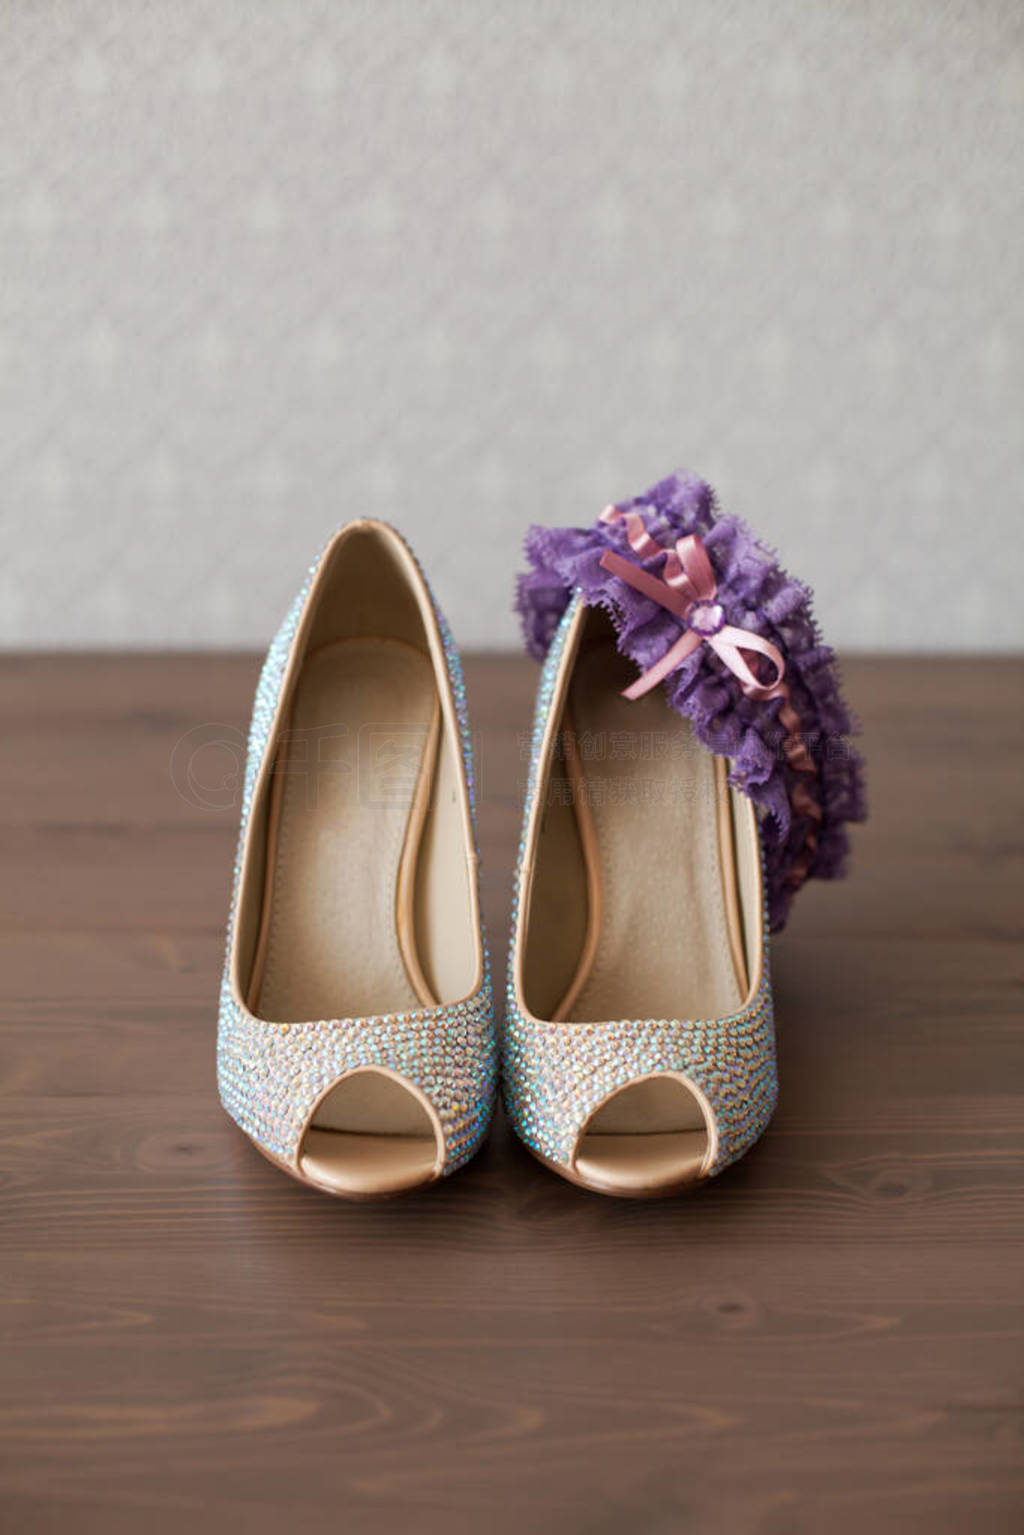 Elegant wedding shoes with colored rhinestones on the wooden flo